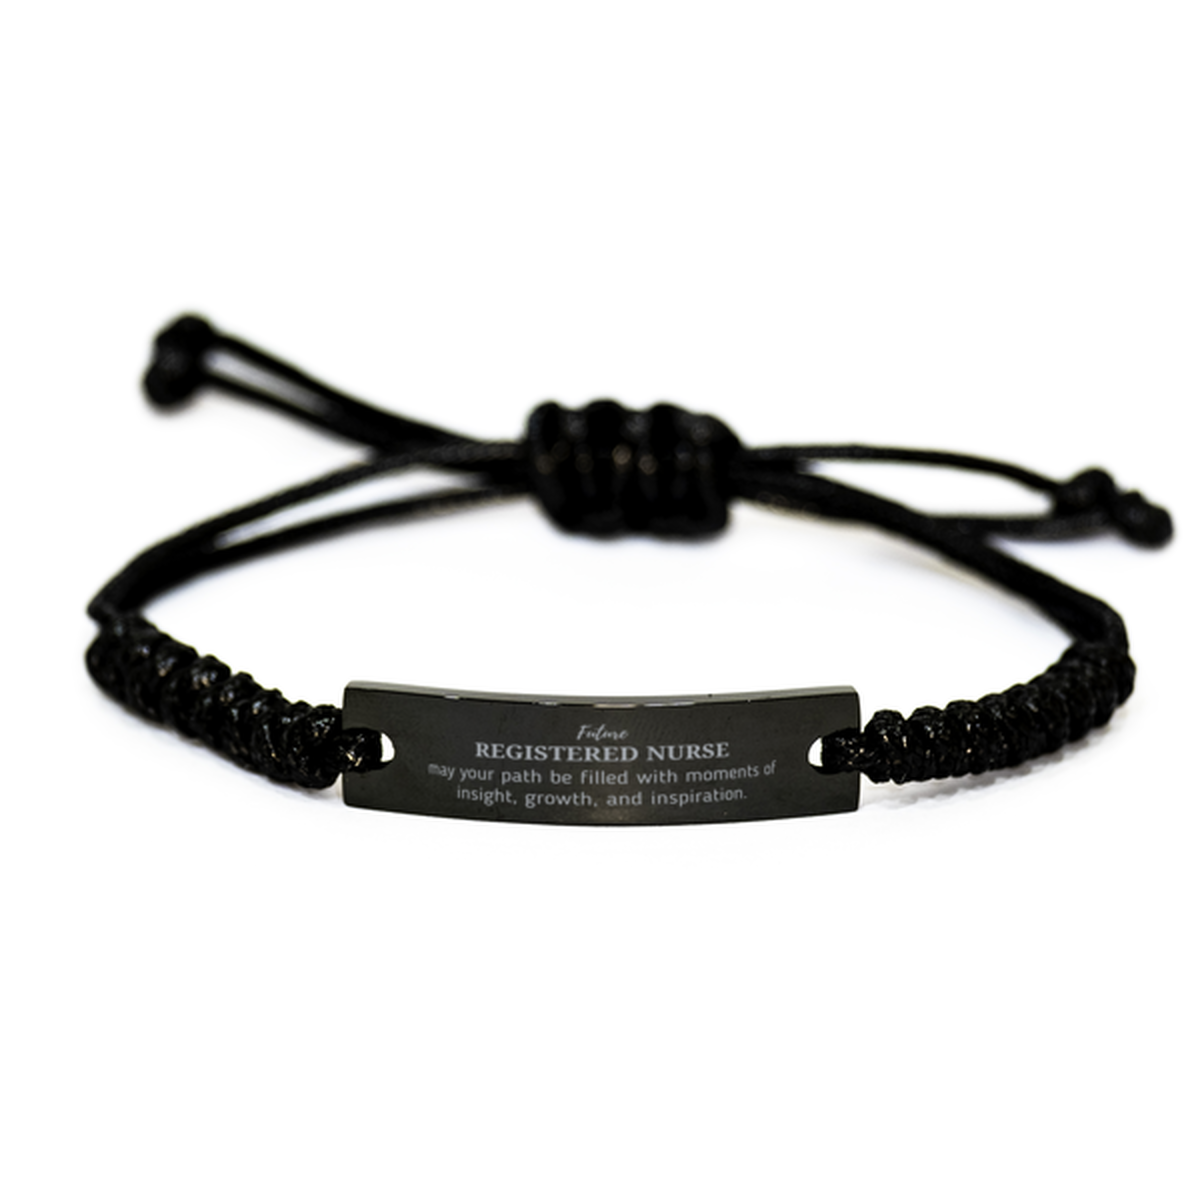 Future Registered Nurse Gifts, May your path be filled with moments of insight, Graduation Gifts for New Registered Nurse, Christmas Unique Black Rope Bracelet For Men, Women, Friends